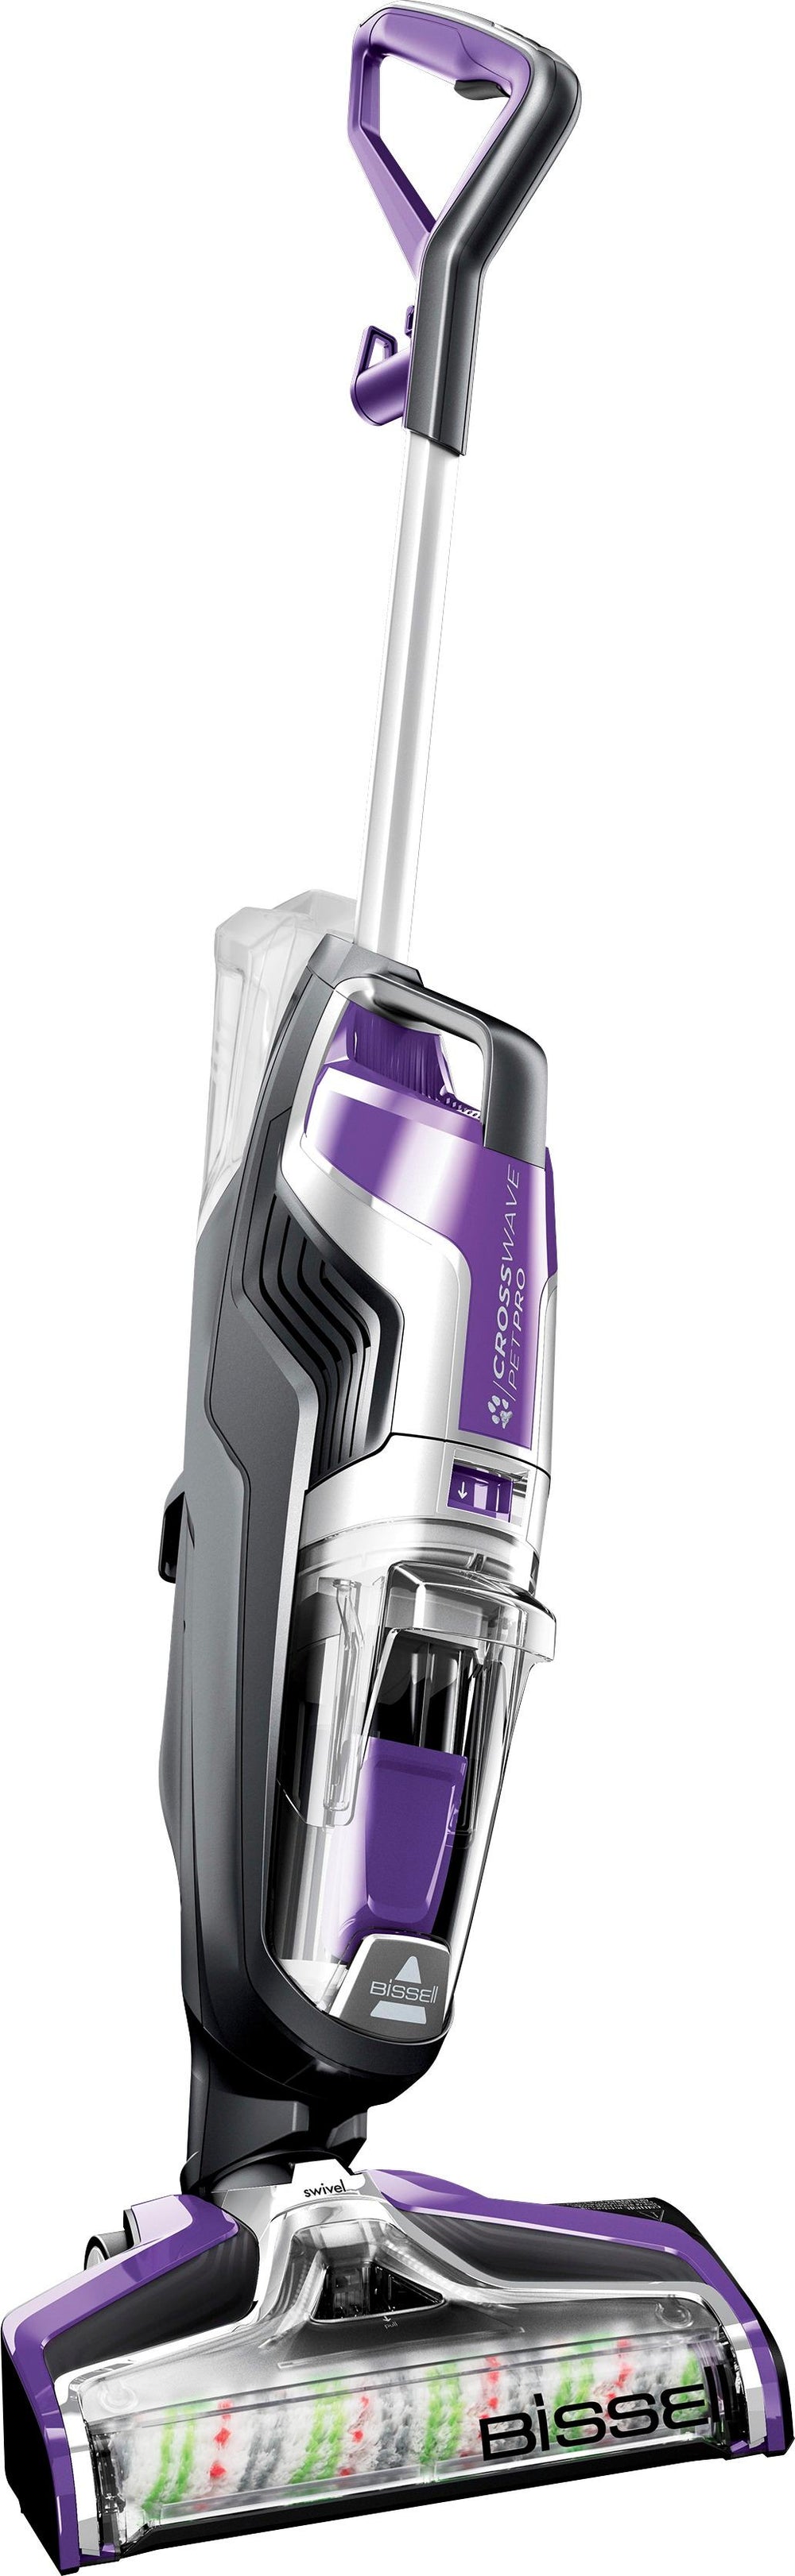 BISSELL - CrossWave Pet Pro All-in-One Multi-Surface Cleaner - Grapevine Purple and Sparkle Silver_1